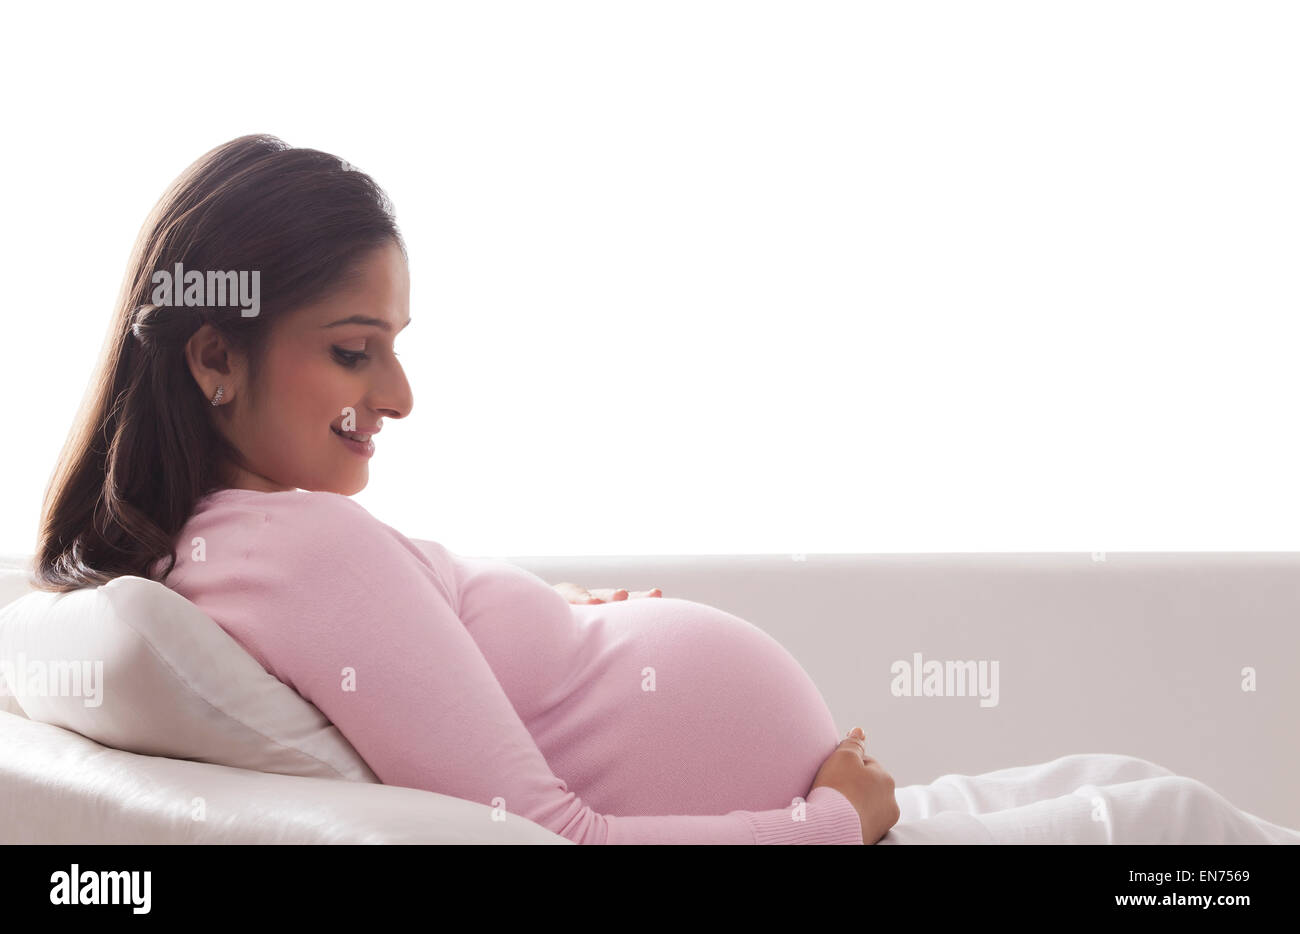 Pregnant woman looking at her stomach Stock Photo